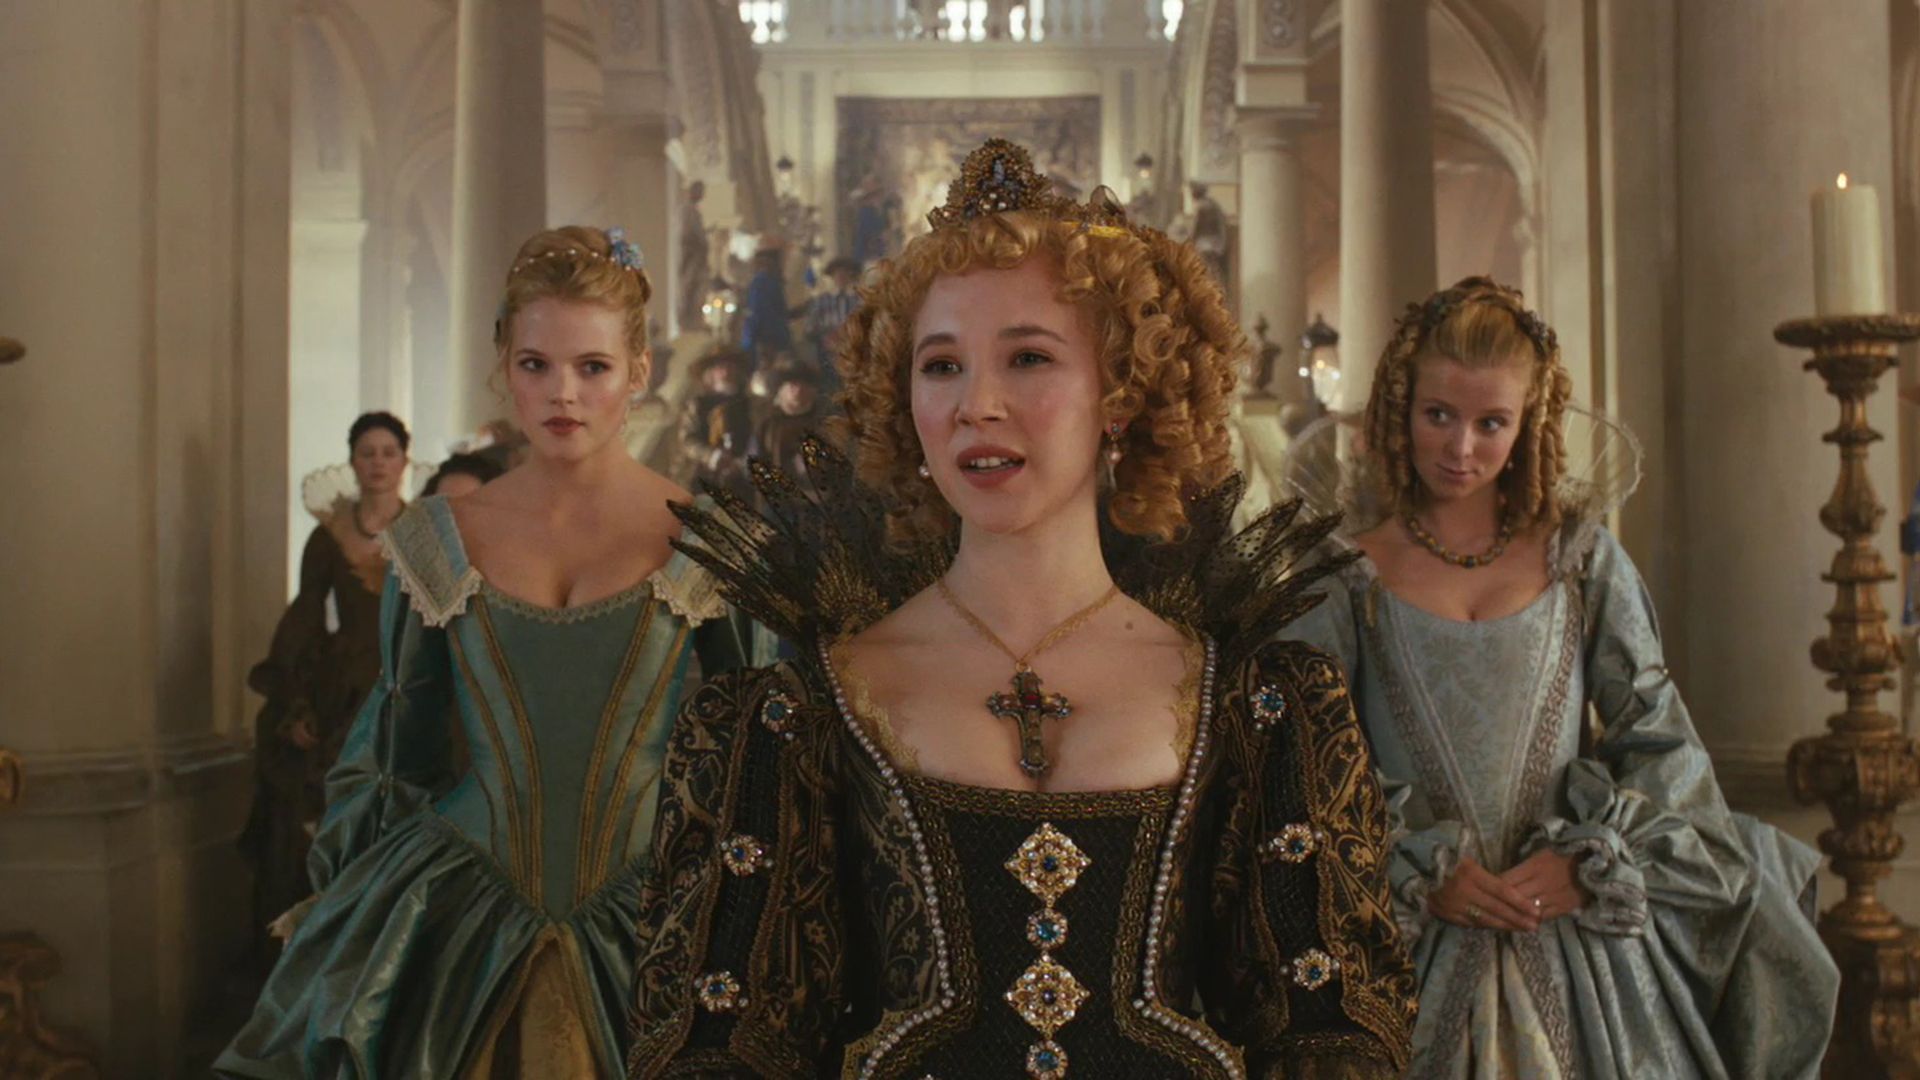 Juno Temple as Queen Anne